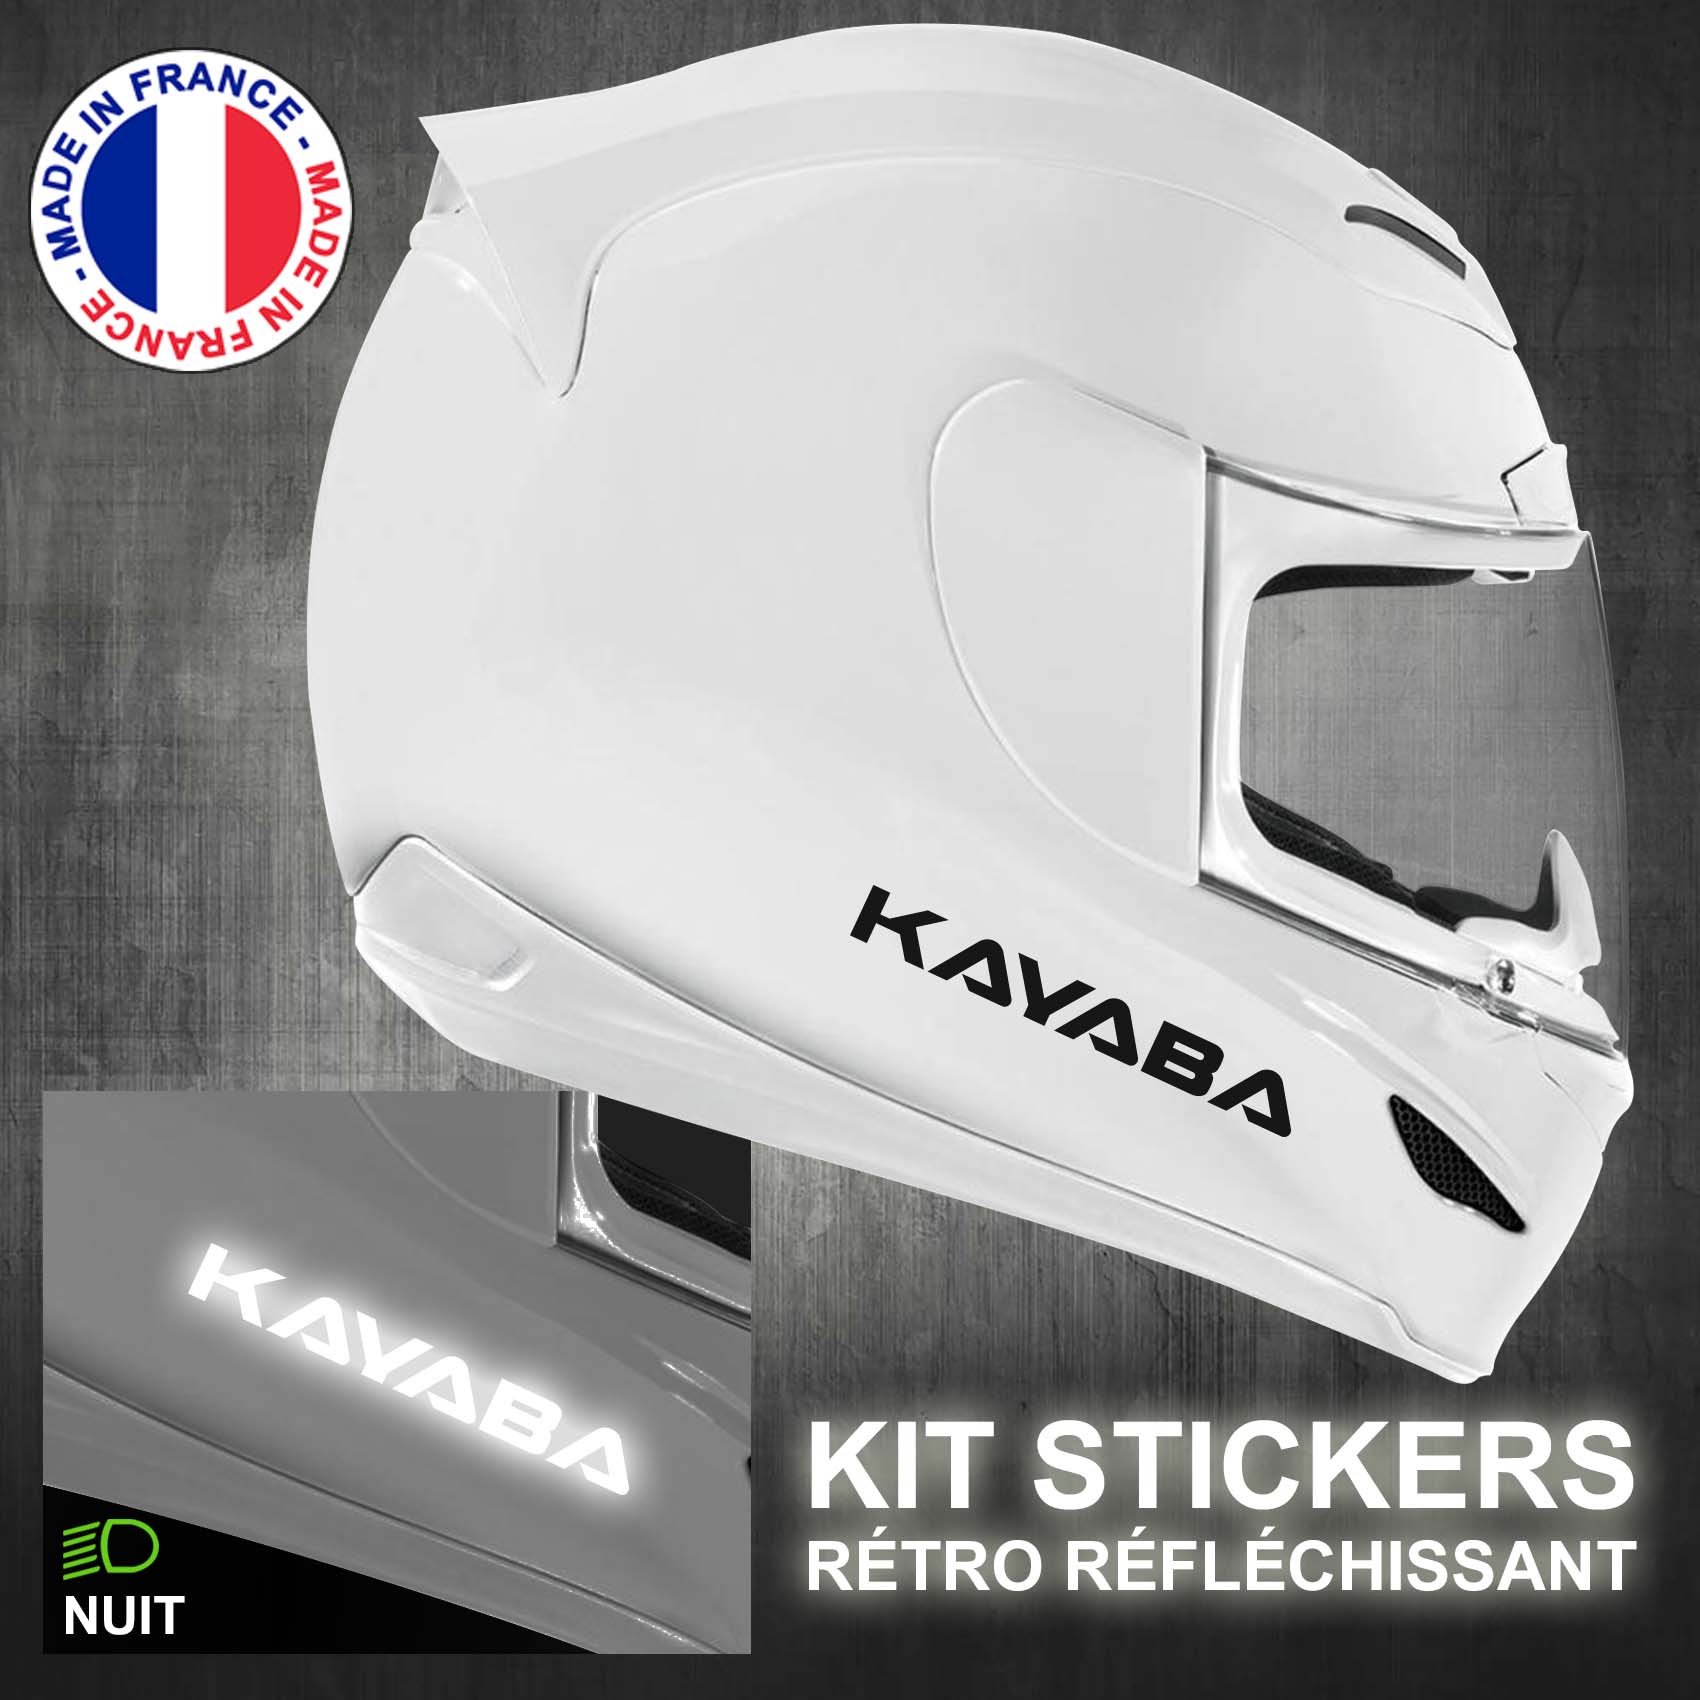 stickers-casque-moto-kayaba-ref2-retro-reflechissant-autocollant-moto-velo-tuning-racing-route-sticker-casques-adhesif-scooter-nuit-securite-decals-personnalise-personnalisable-min